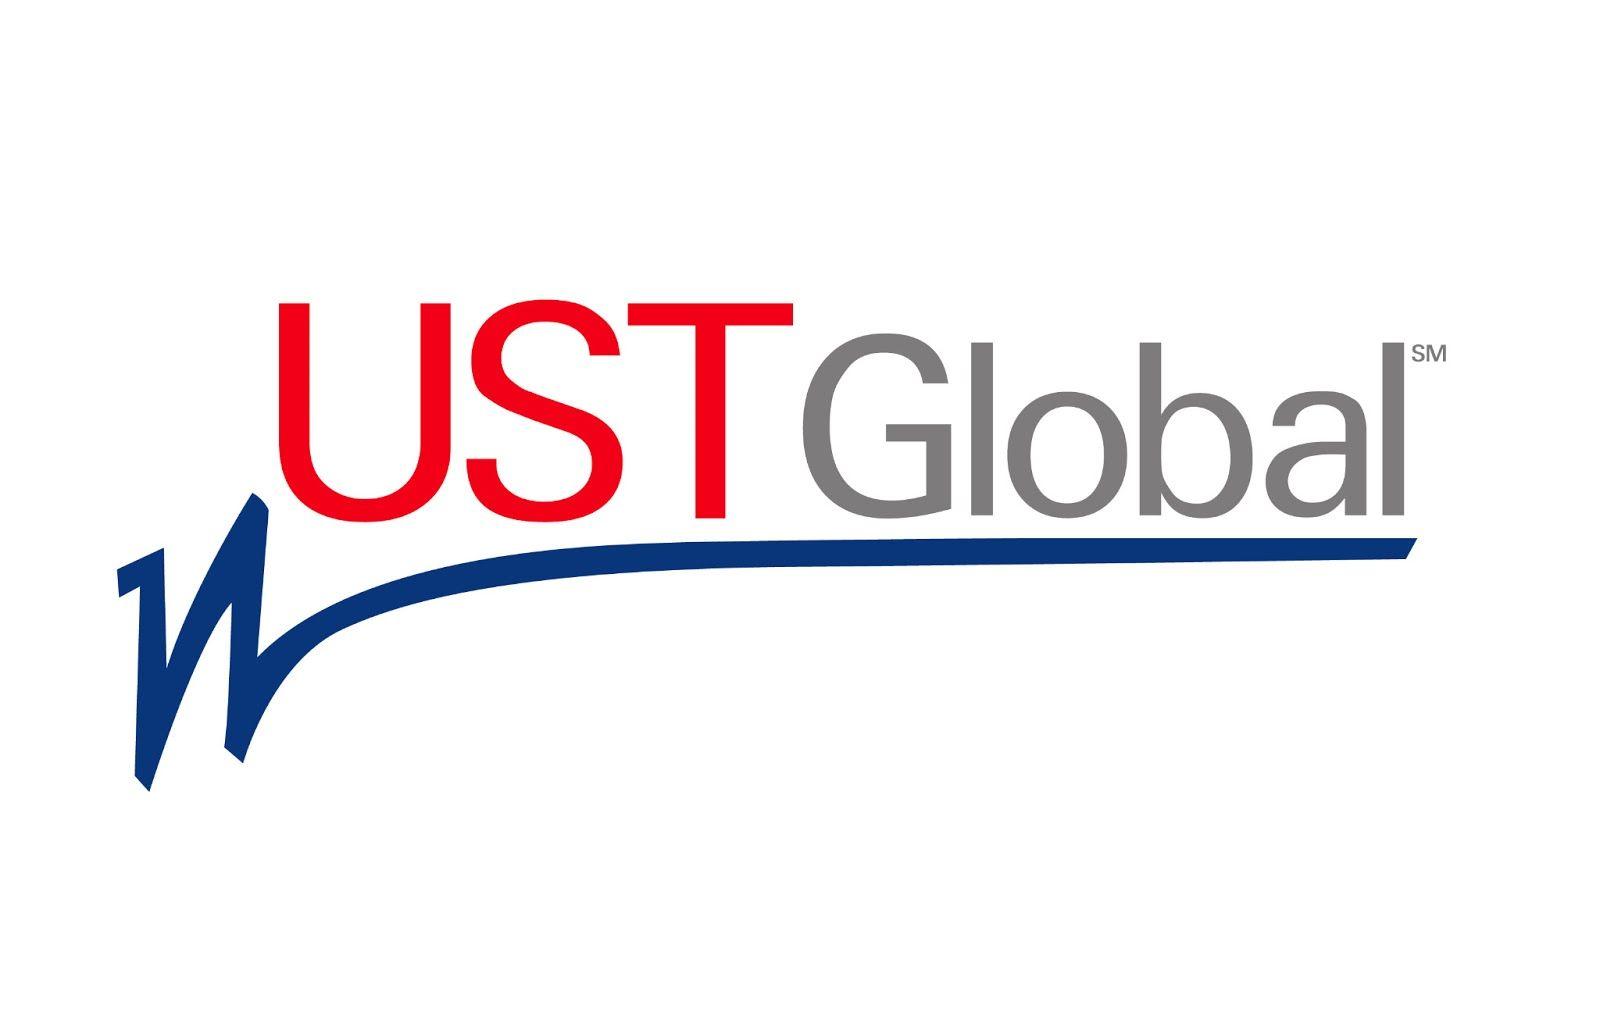 American Information Technology Company Logo - UST To Train 10K Employees, Establish R&D Center In Israel | News Brief